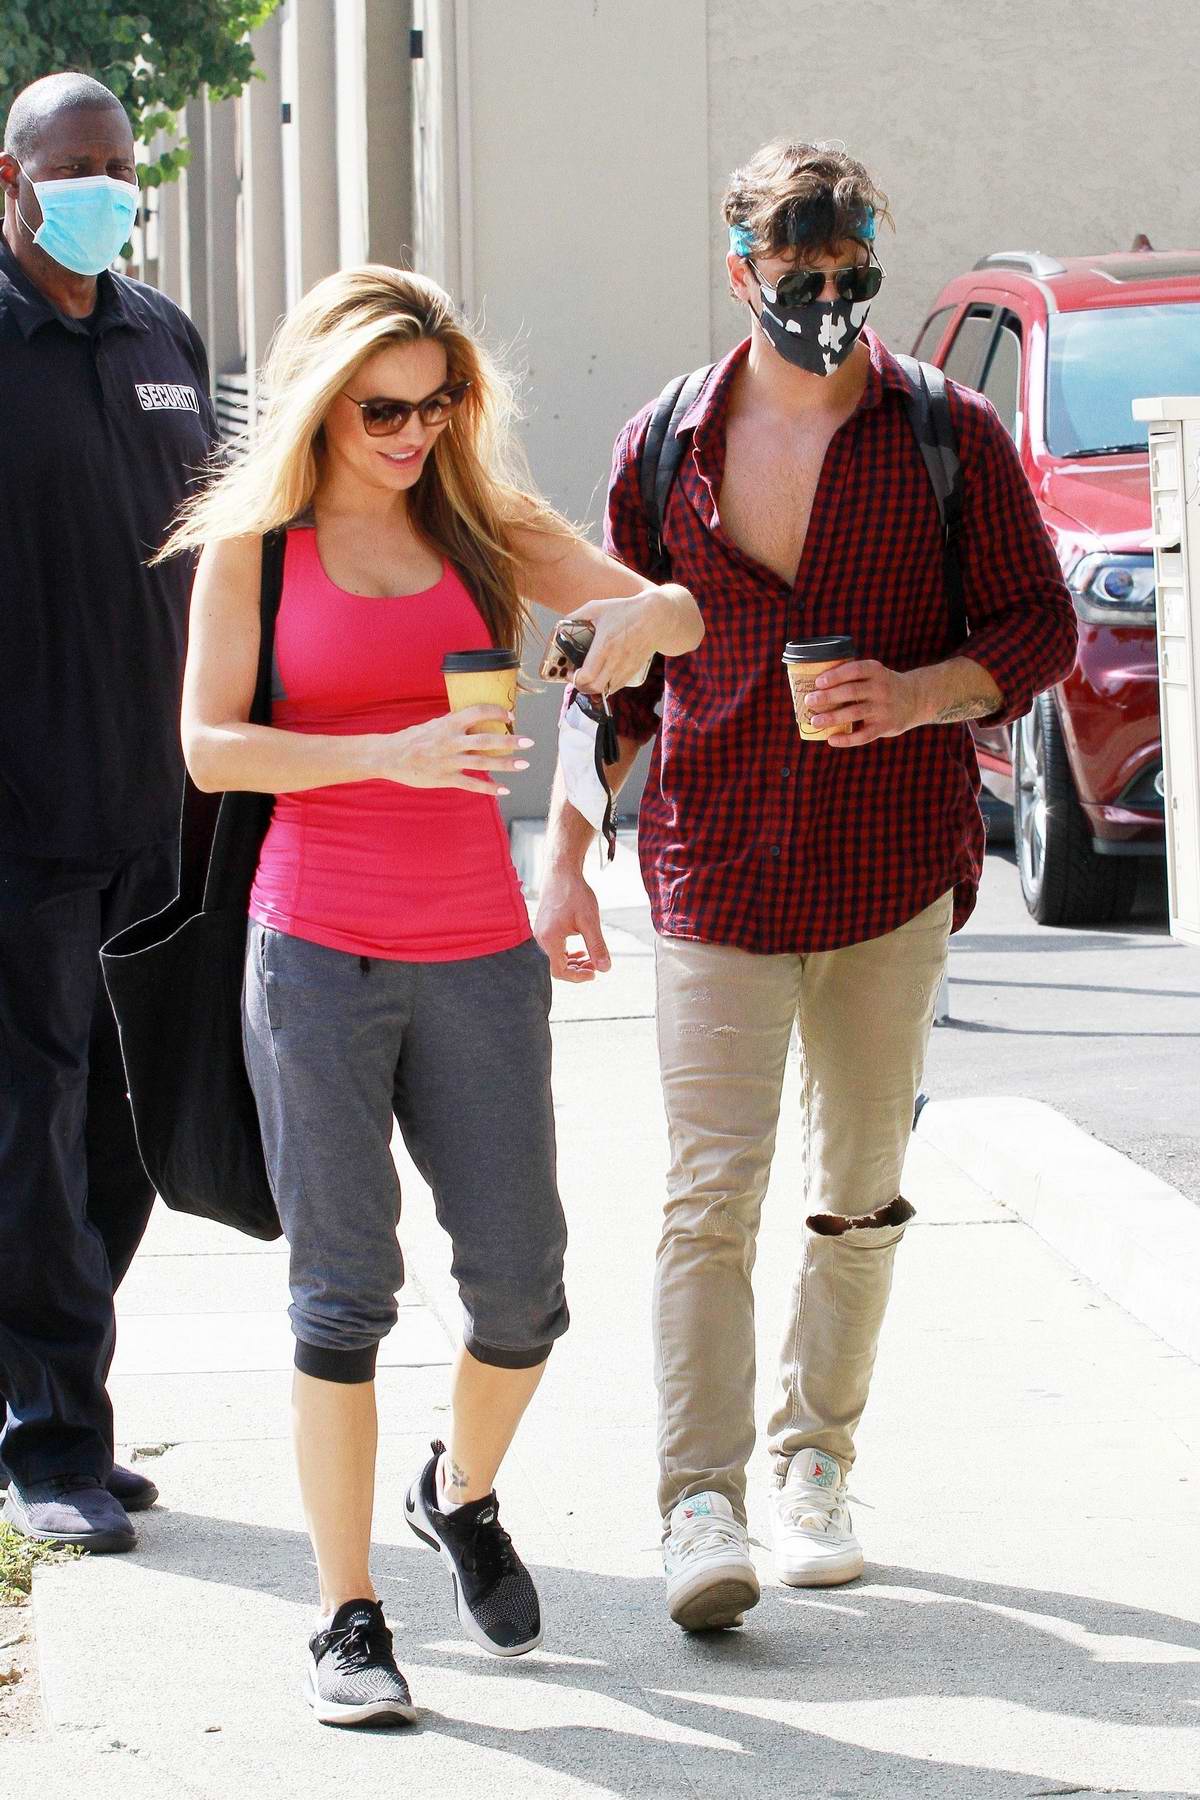 Chrishell Stause wears a hot pink tank top as she arrives at the DWTS  studio in